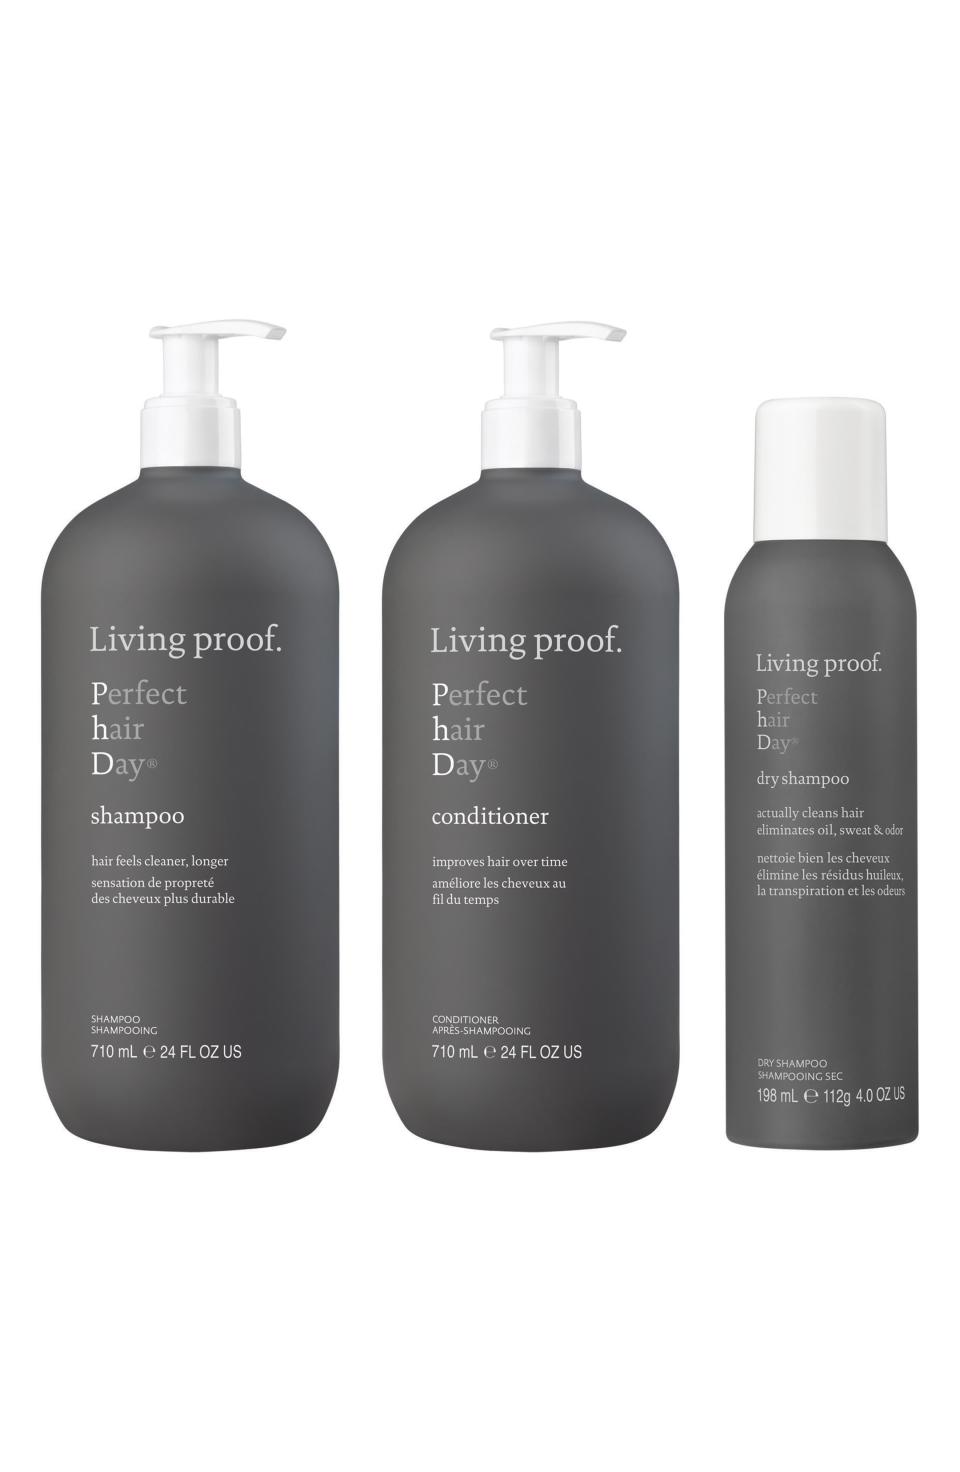 16) Perfect hair Day™ Deluxe Trio